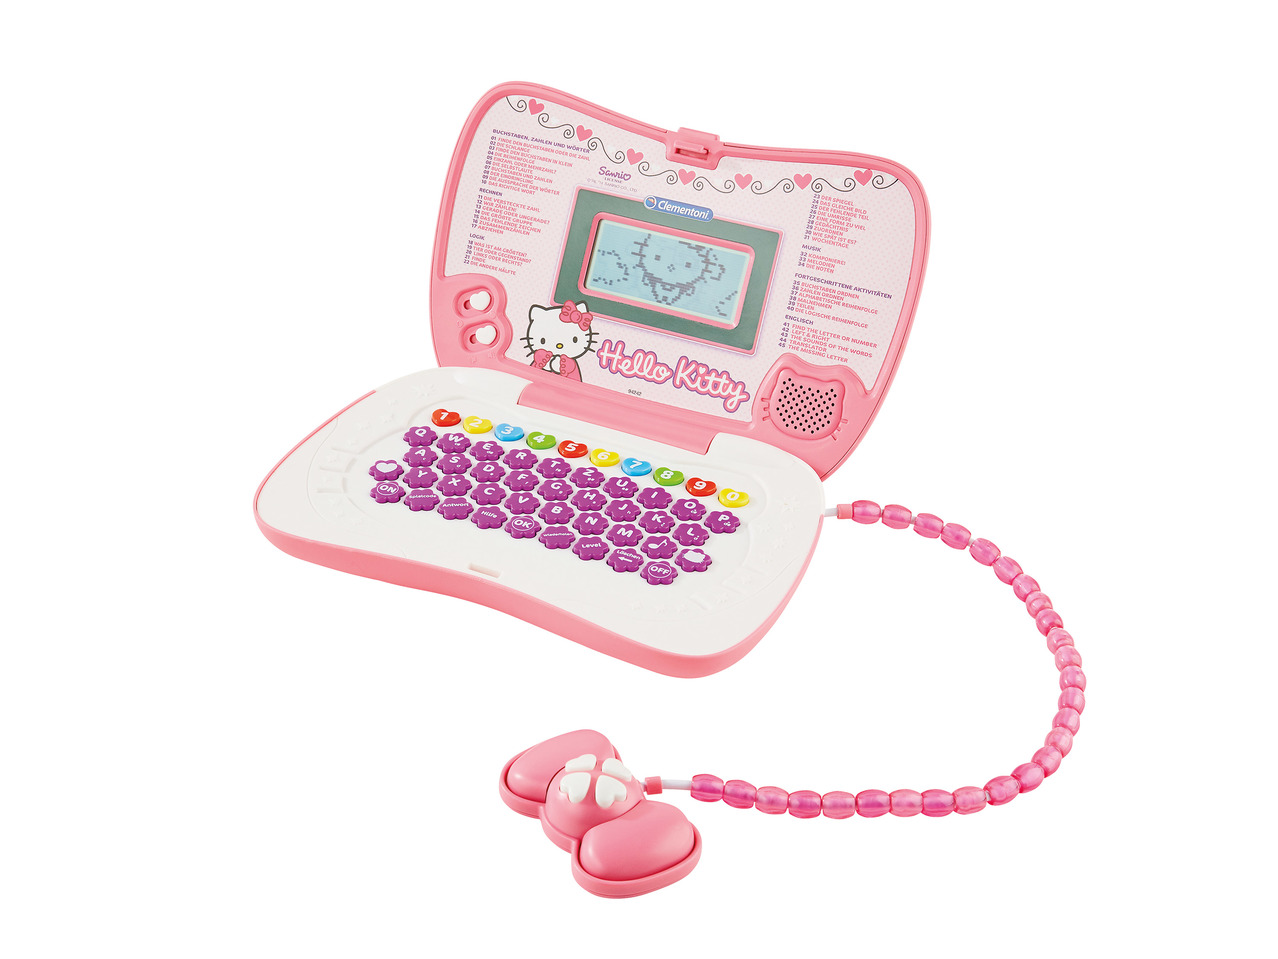 Kids' Character Learn & Play Laptop1